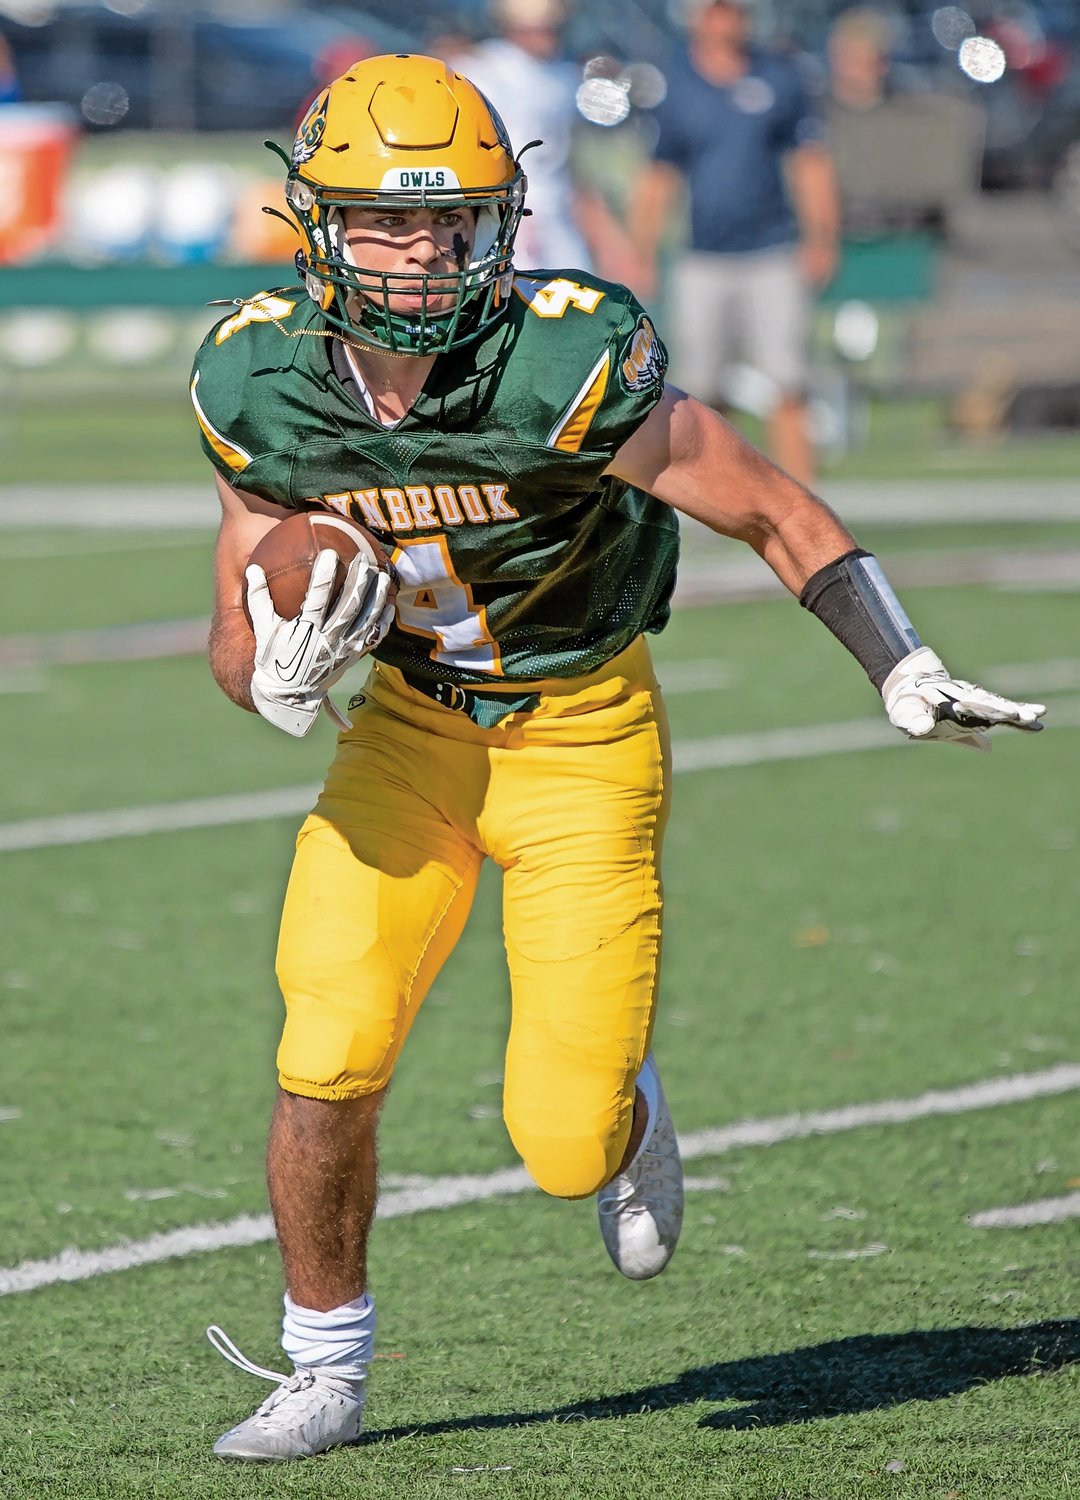 Senior Michael Fagen had a huge say in Lynbrook's 48-27 victory over defending county champ Manhasset in Week 2 with two rushing touchdowns and a receiving score.